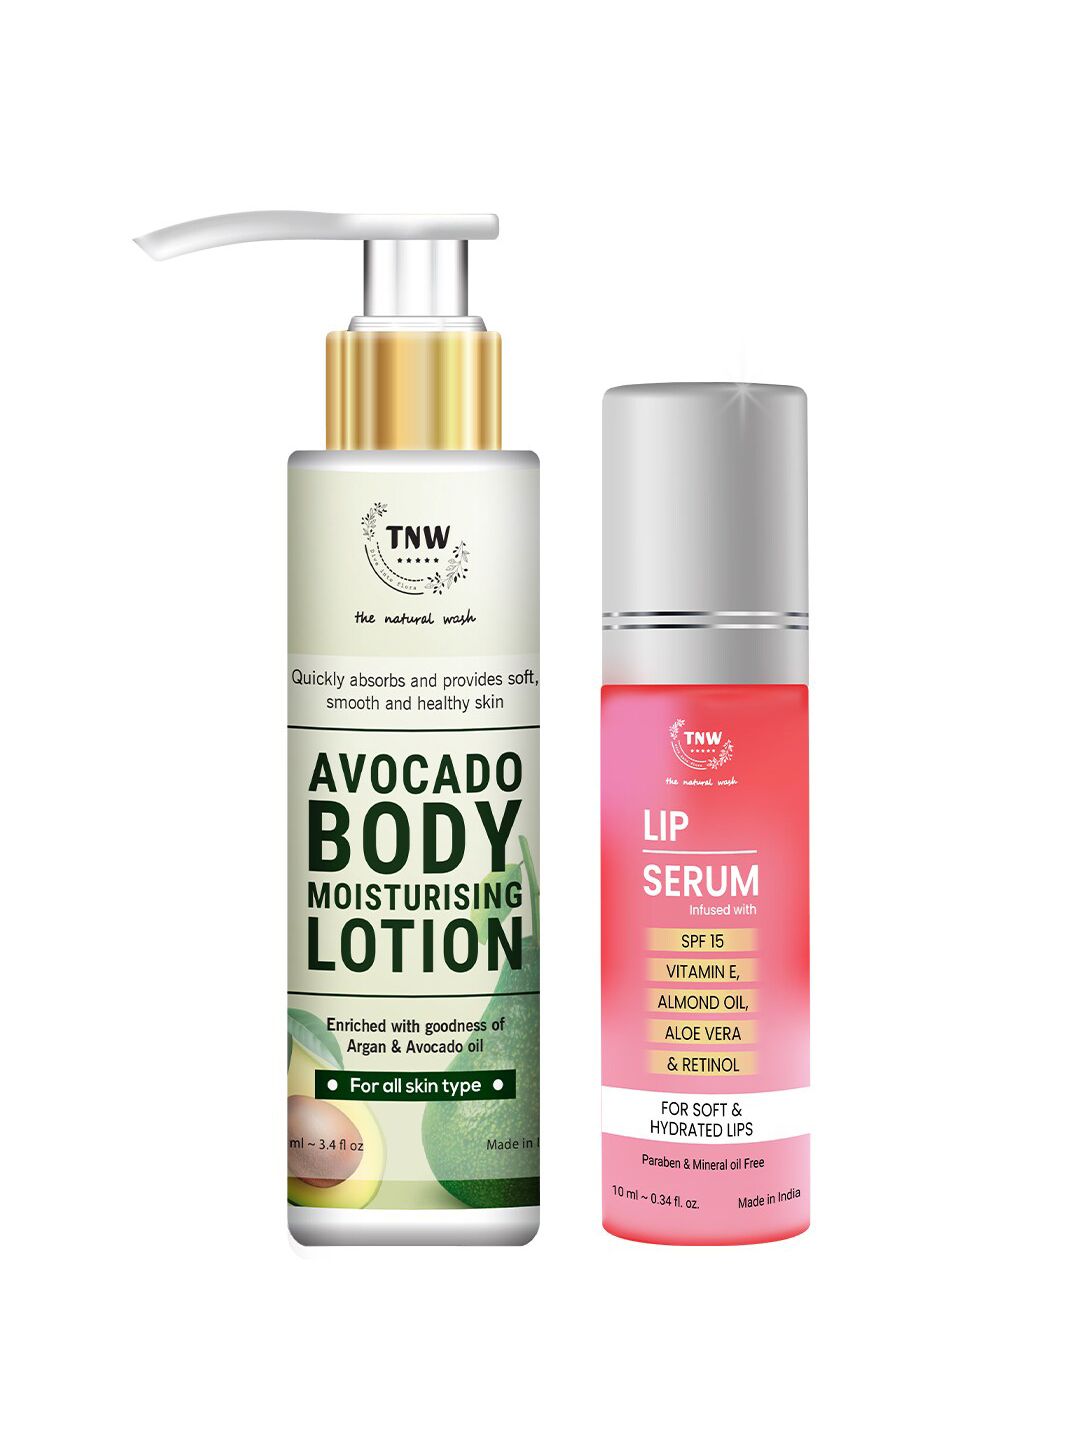 TNW the natural wash Lip Serum and Avocado Body Moisturizing Lotion Price in India